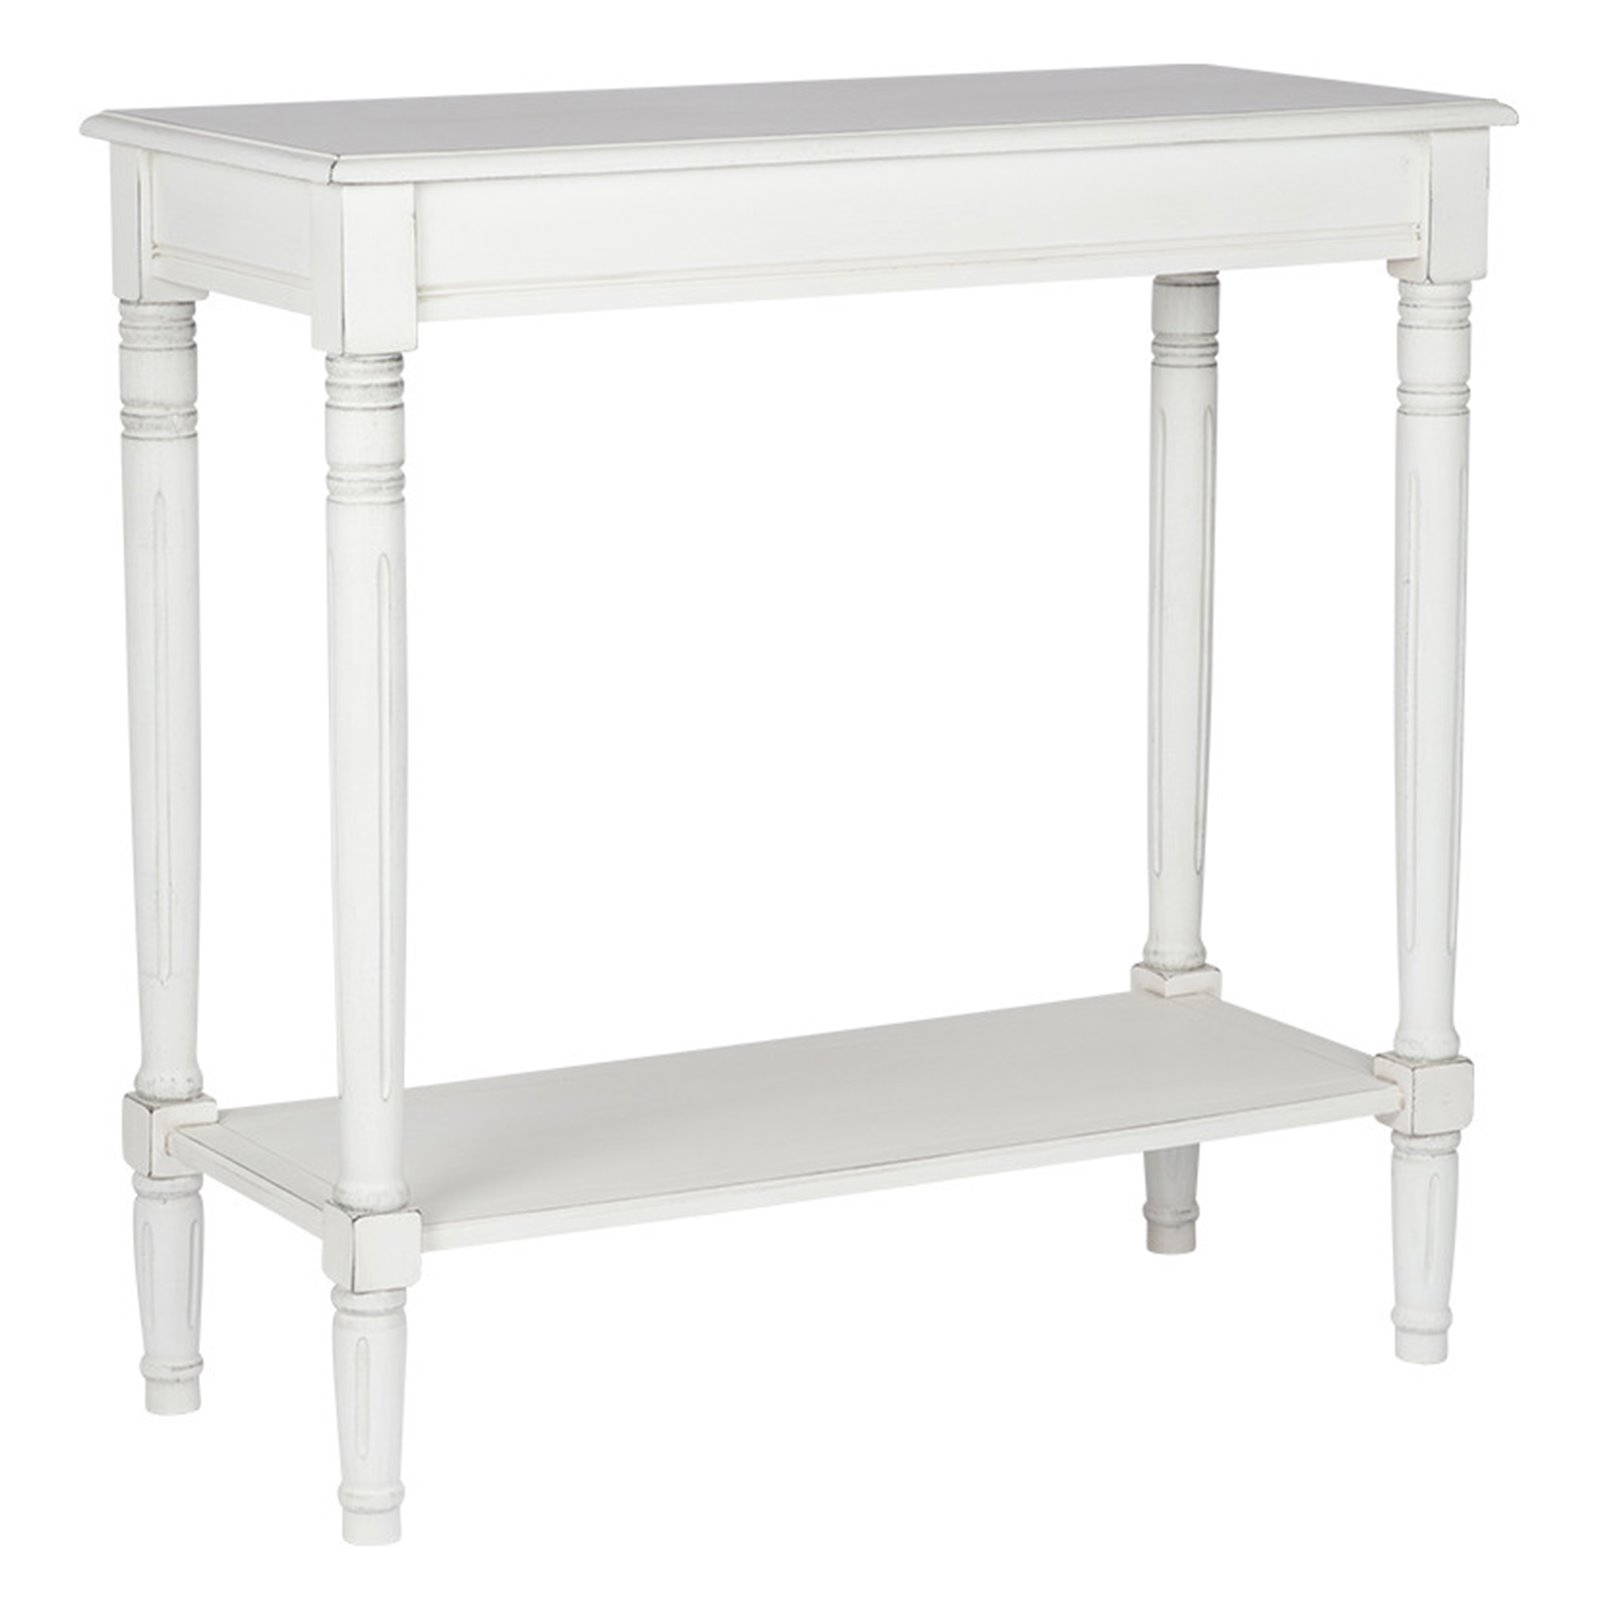 Vintage White Console with Shelf Image